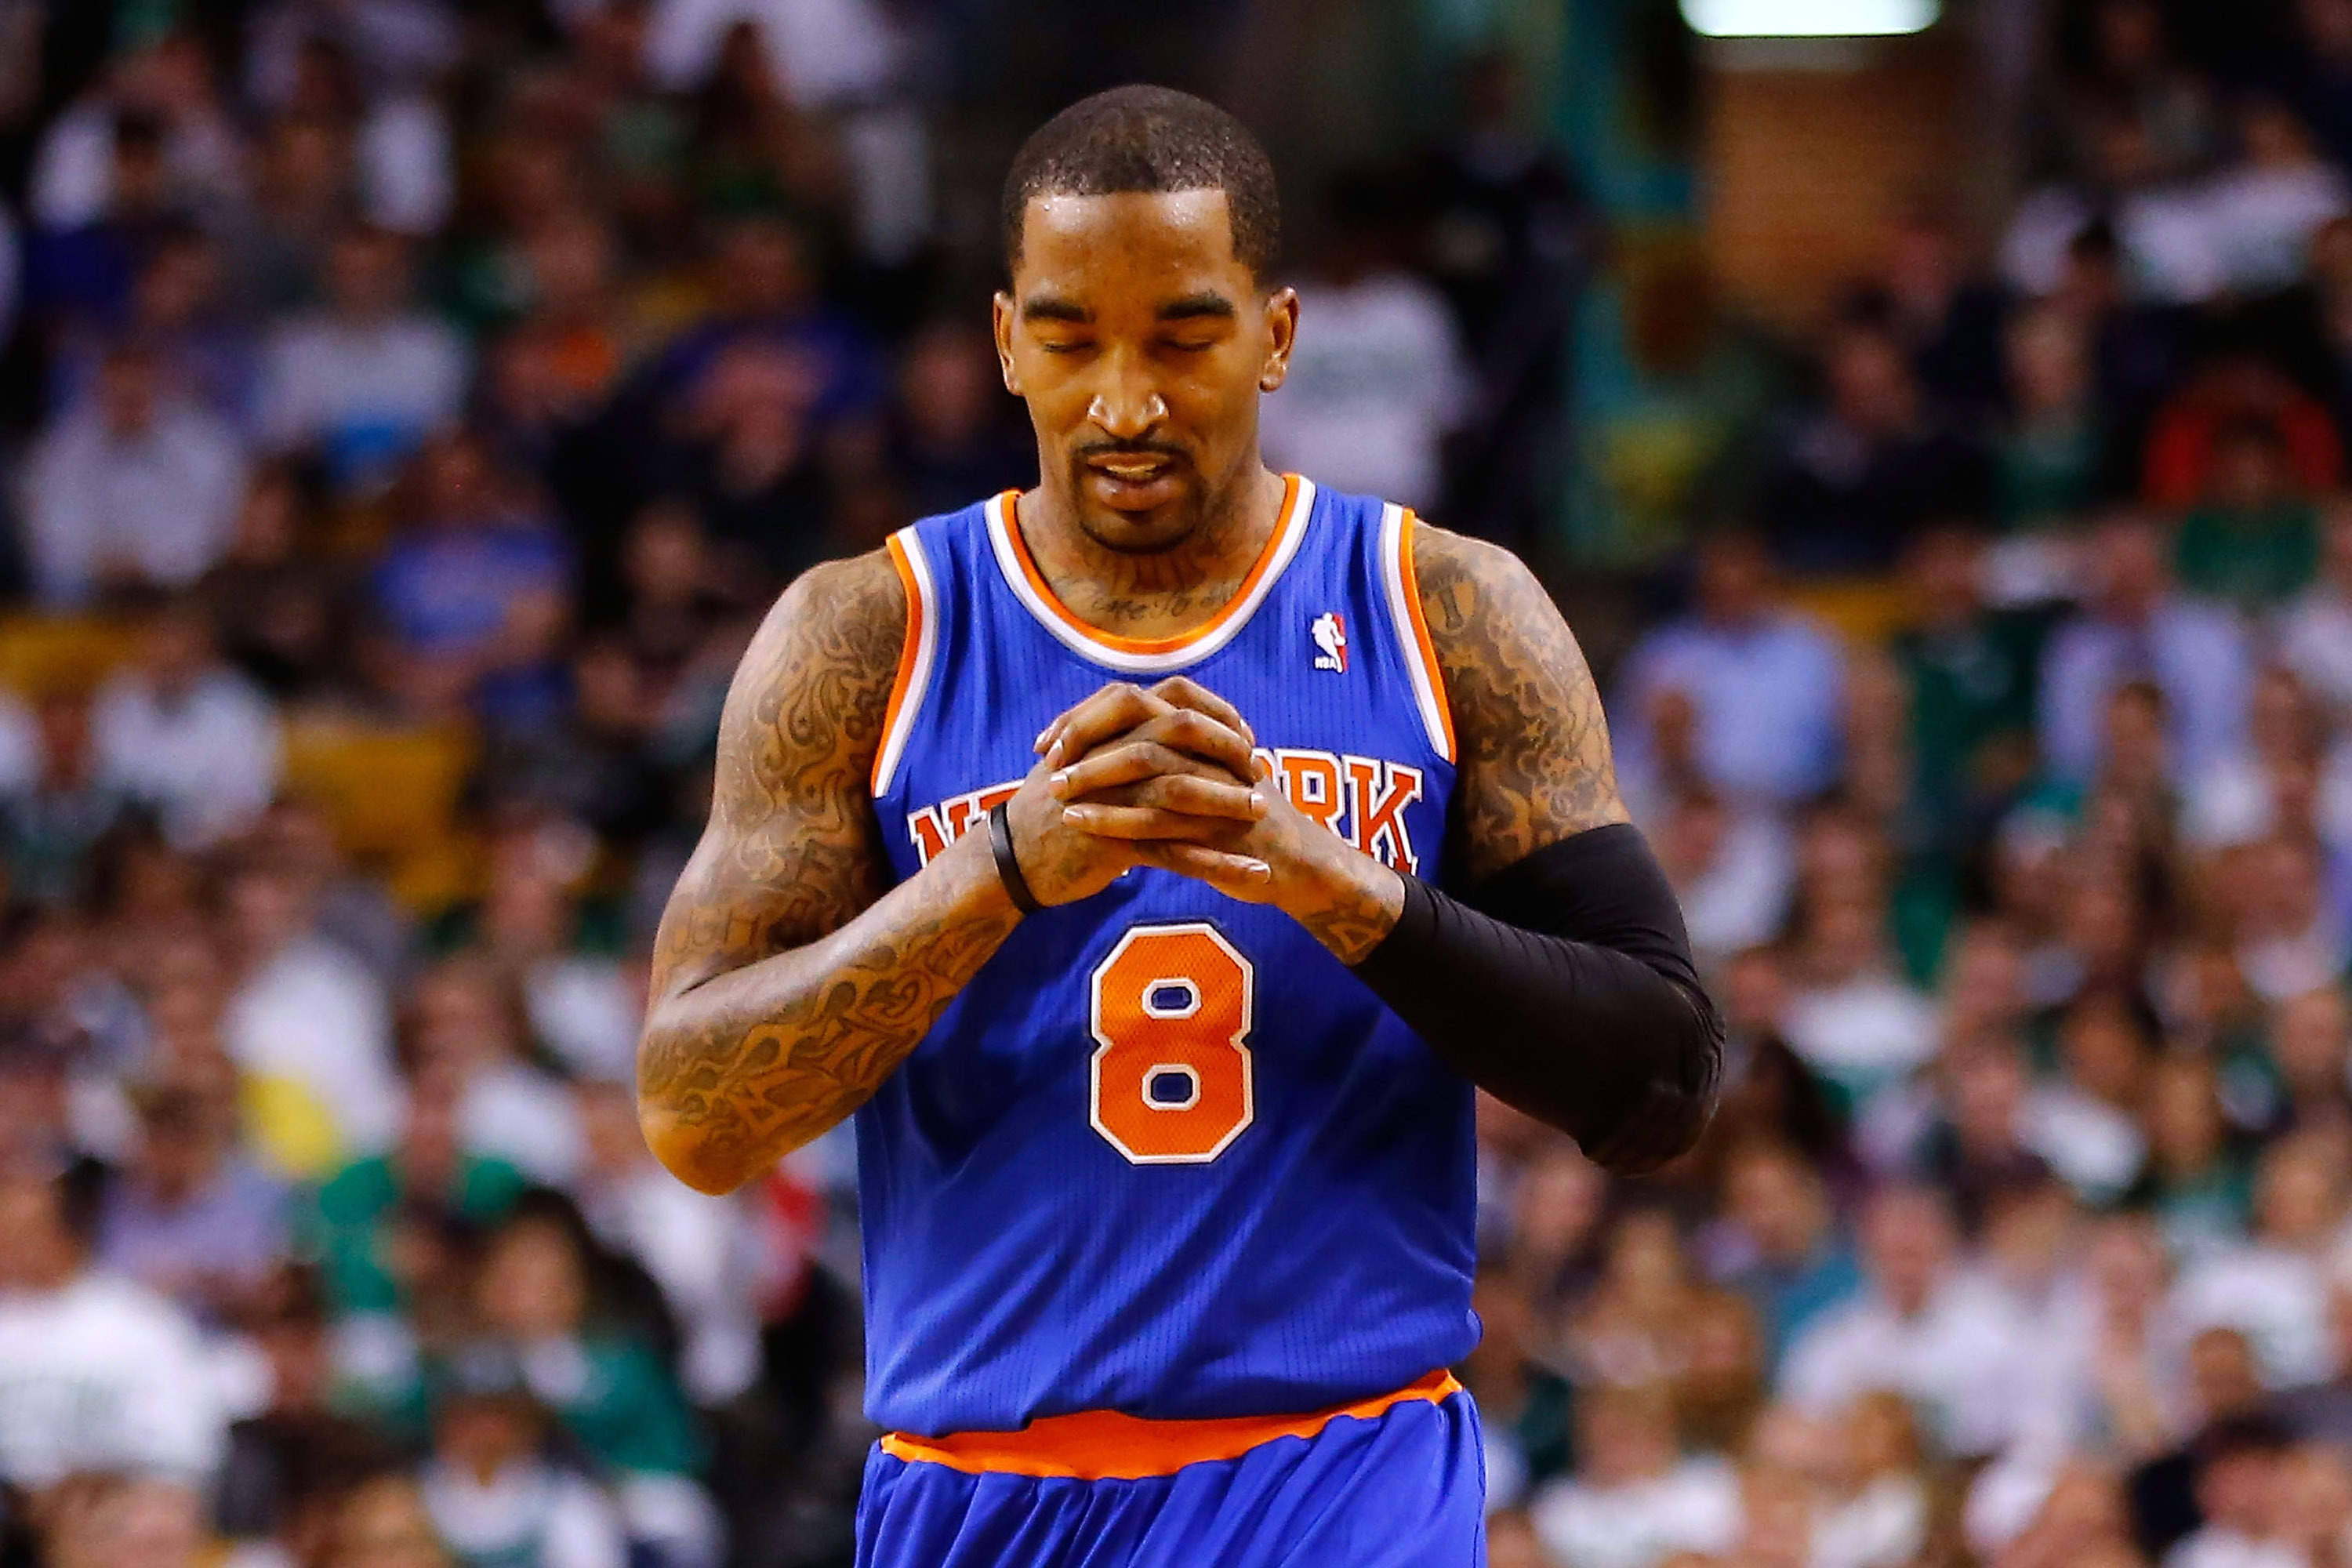 New York Knicks J.R. Smith reacts after making a basket in the third